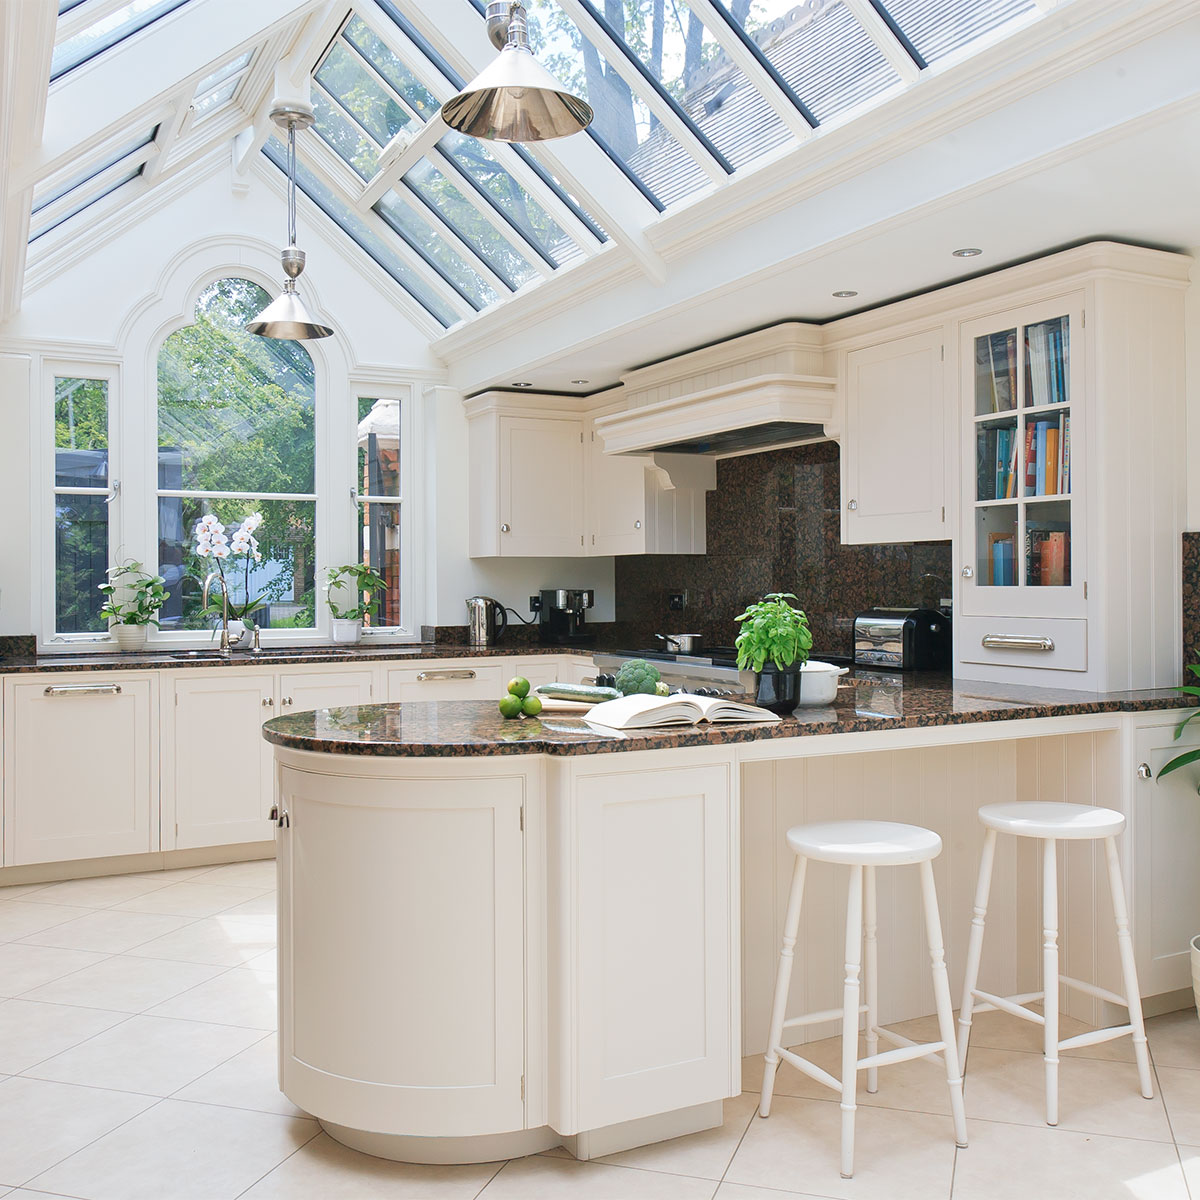 Internal of a linking kitchen conservatory